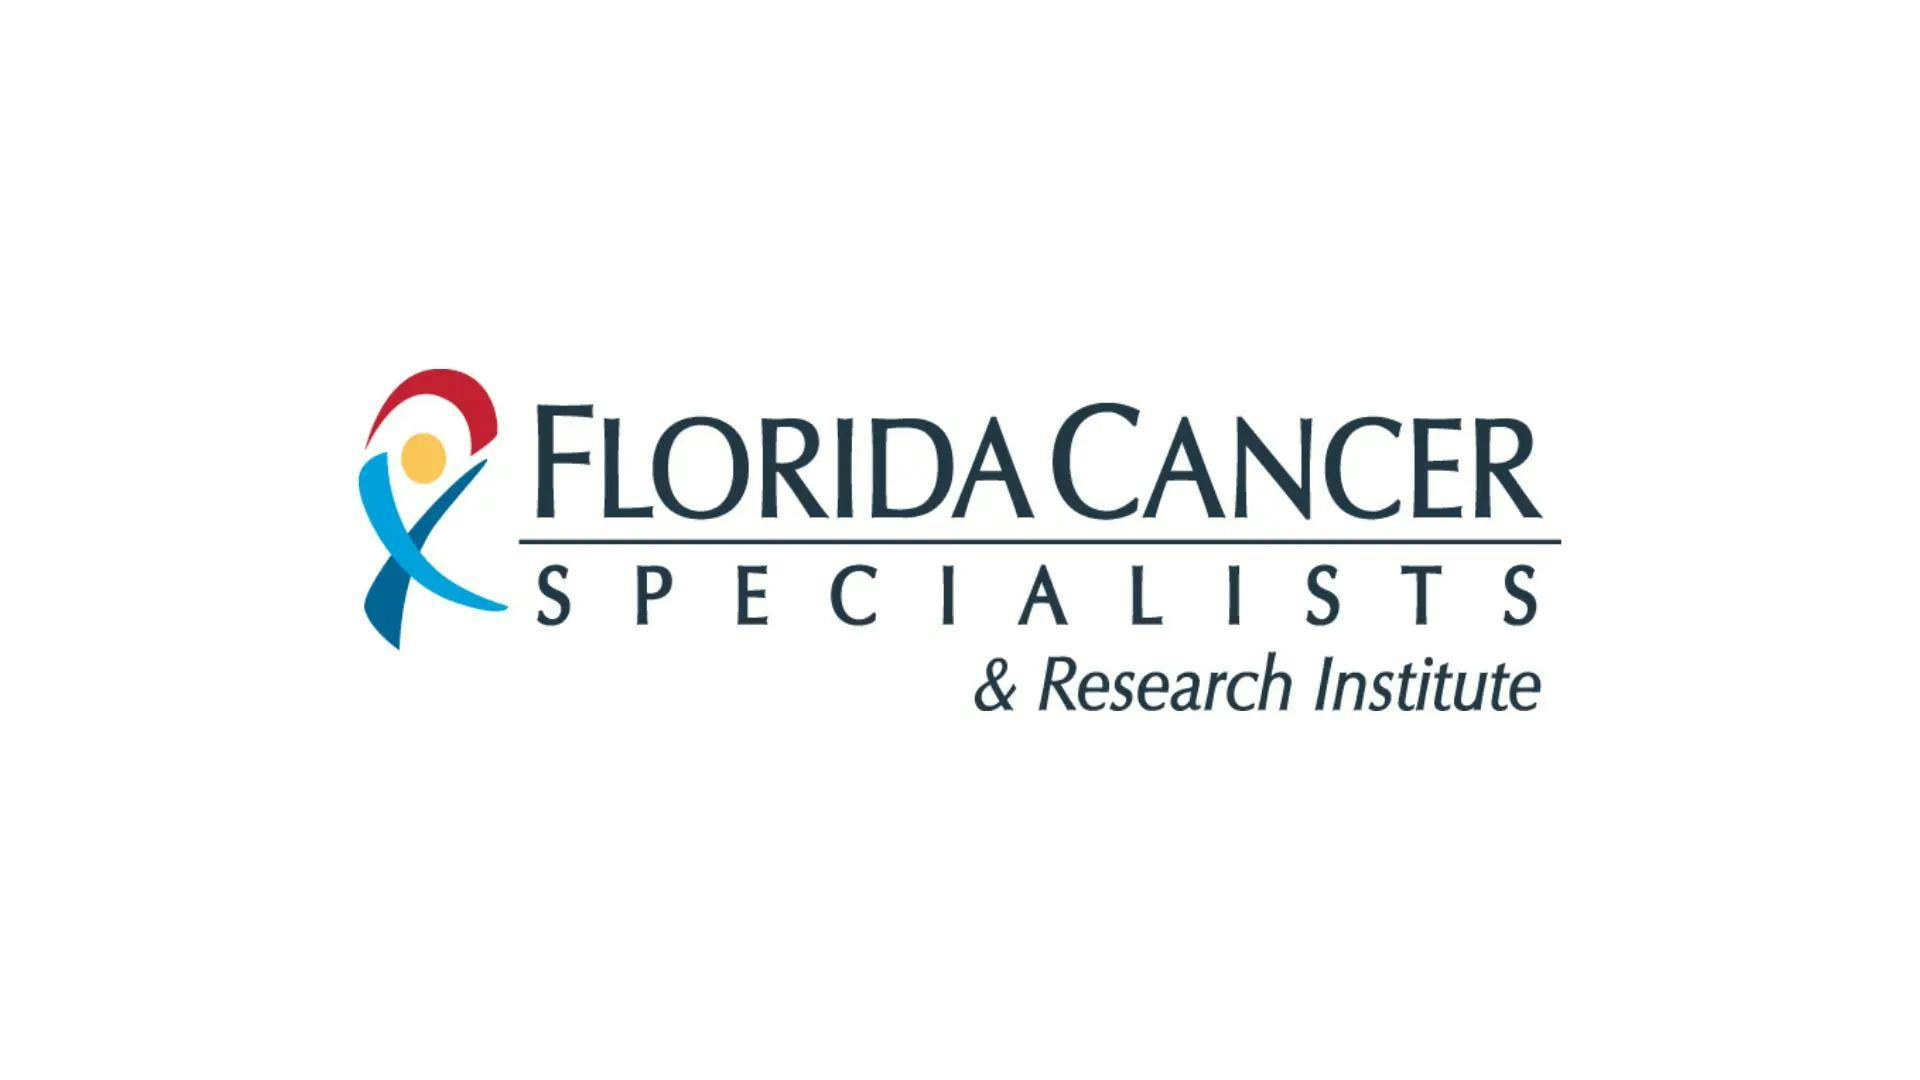 Florida Cancer Specialists & Research Institute Breast Cancer Research Featured at International Symposium